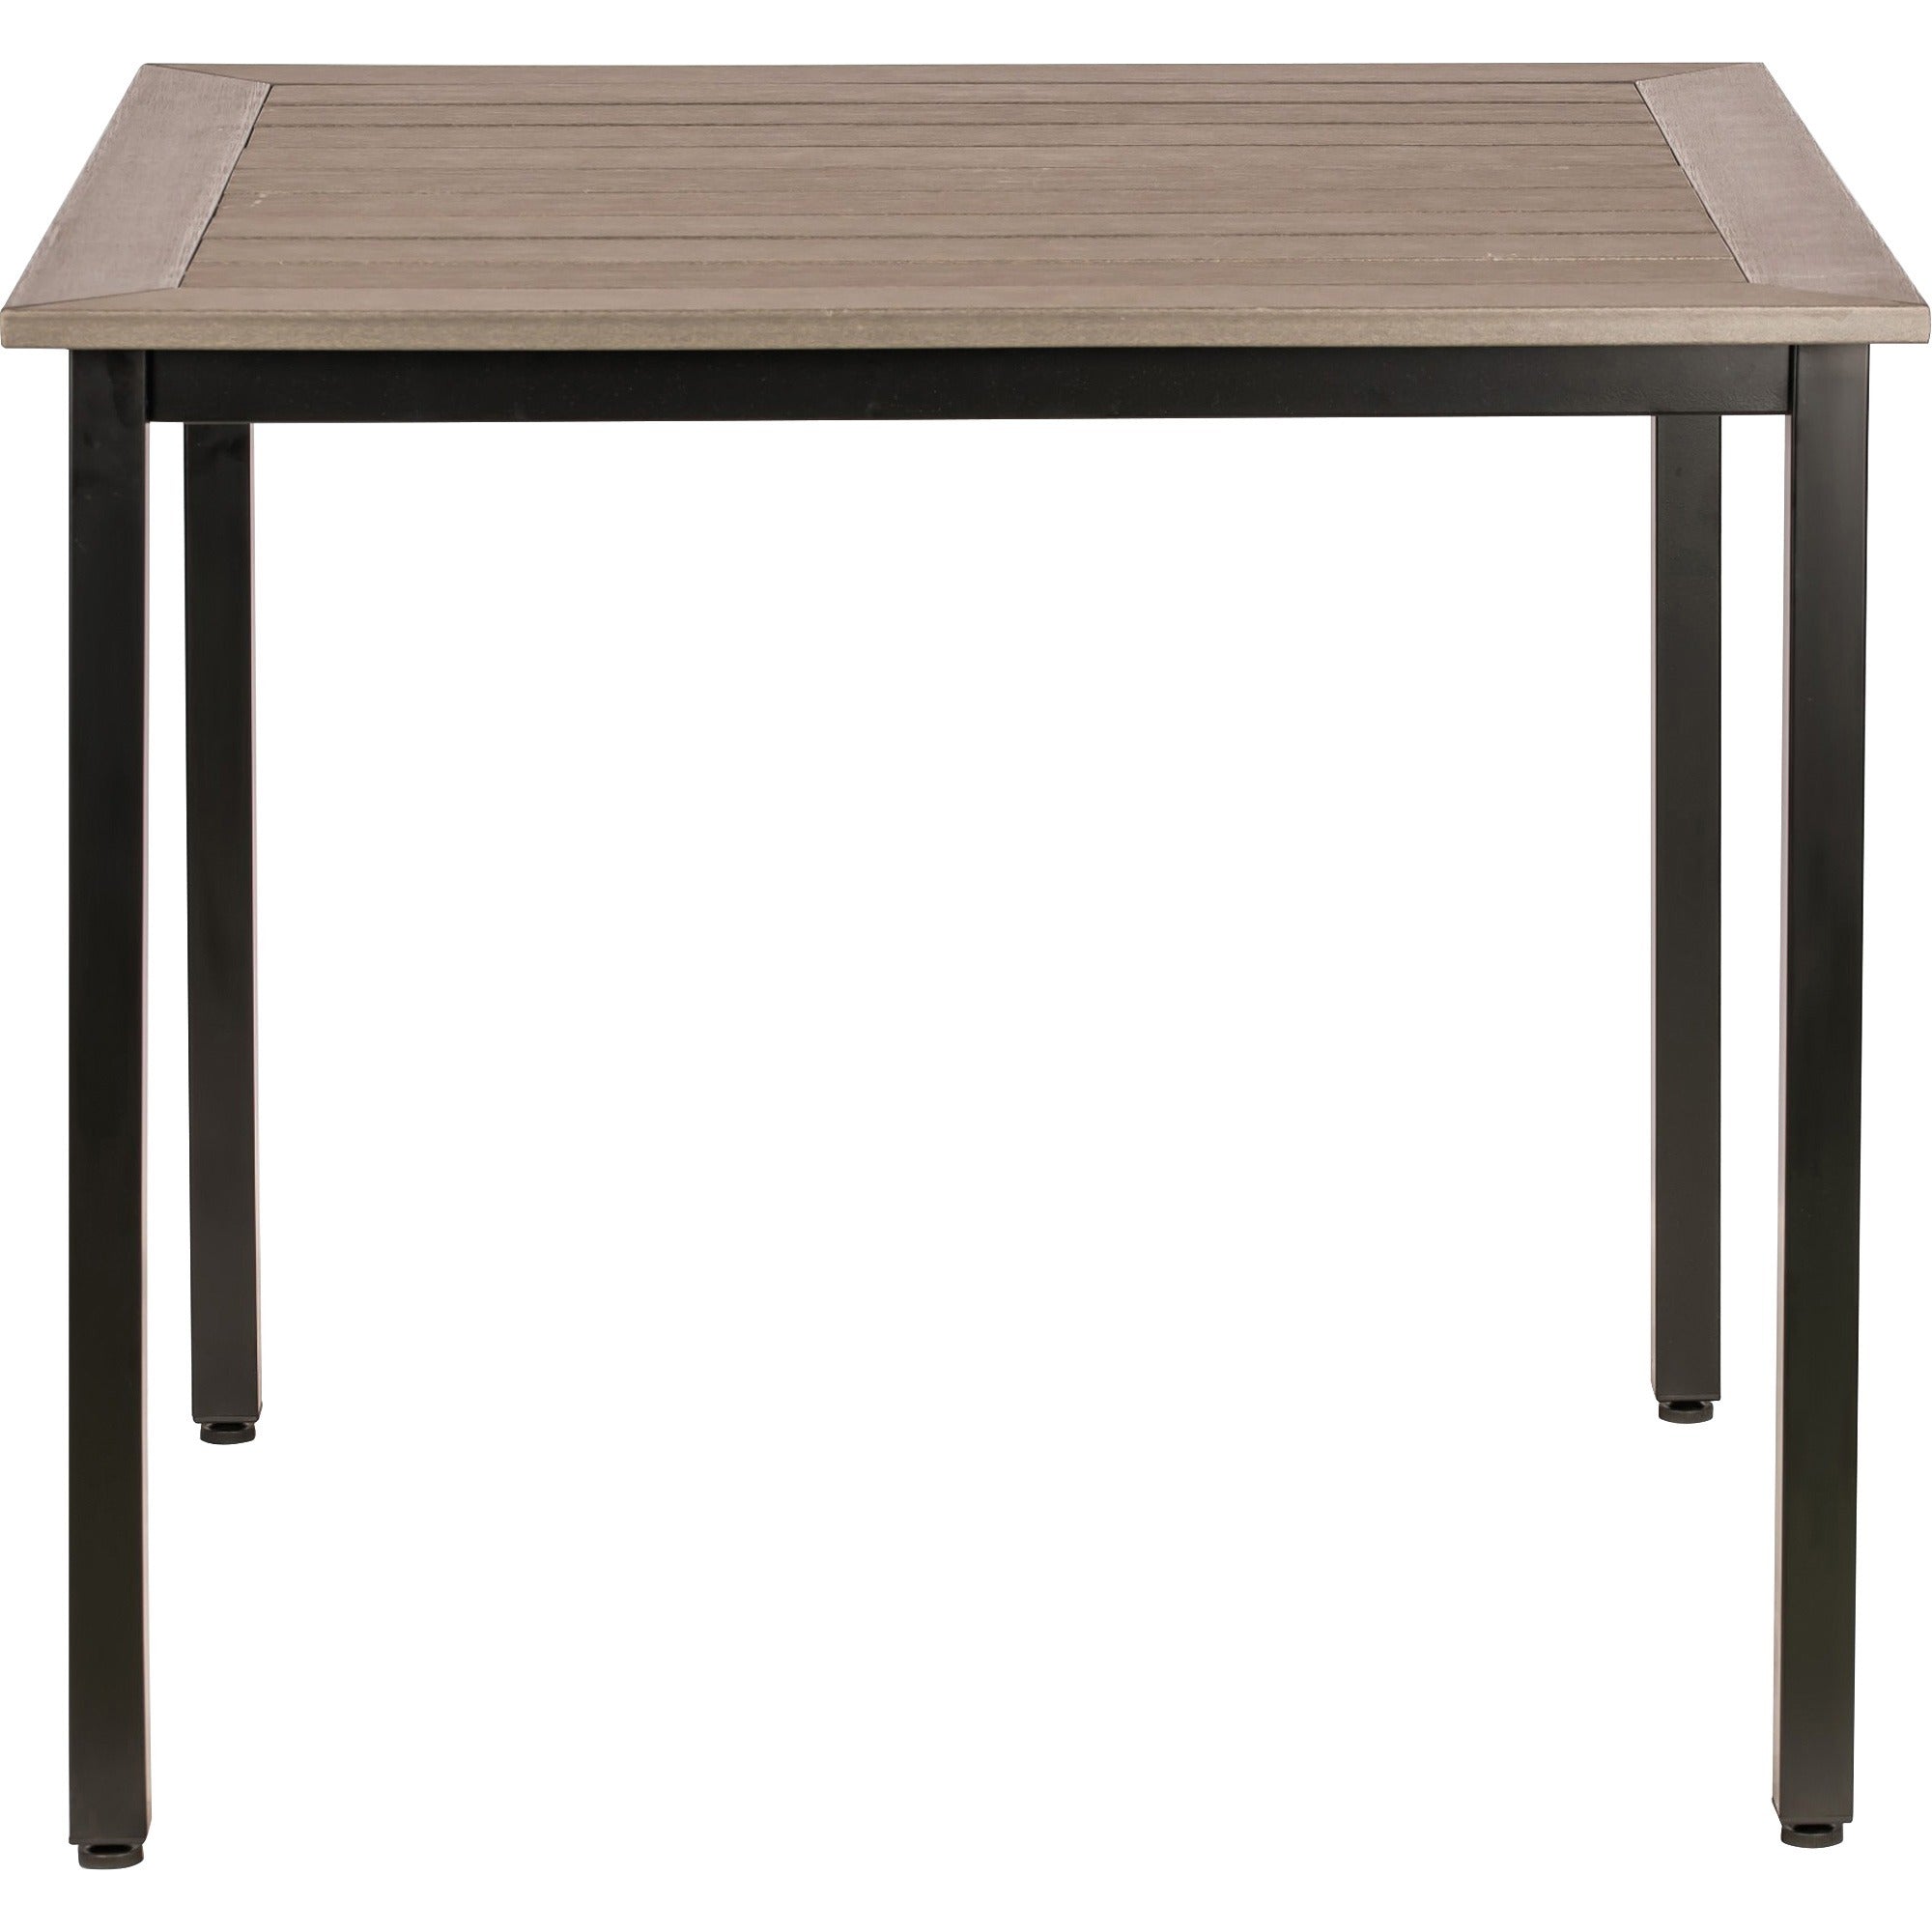 lorell-faux-wood-outdoor-table-for-table-topcharcoal-square-top-black-four-leg-base-4-legs-3660-table-top-length-x-3660-table-top-width-3075-height-assembly-required-1-each_llr42686 - 3